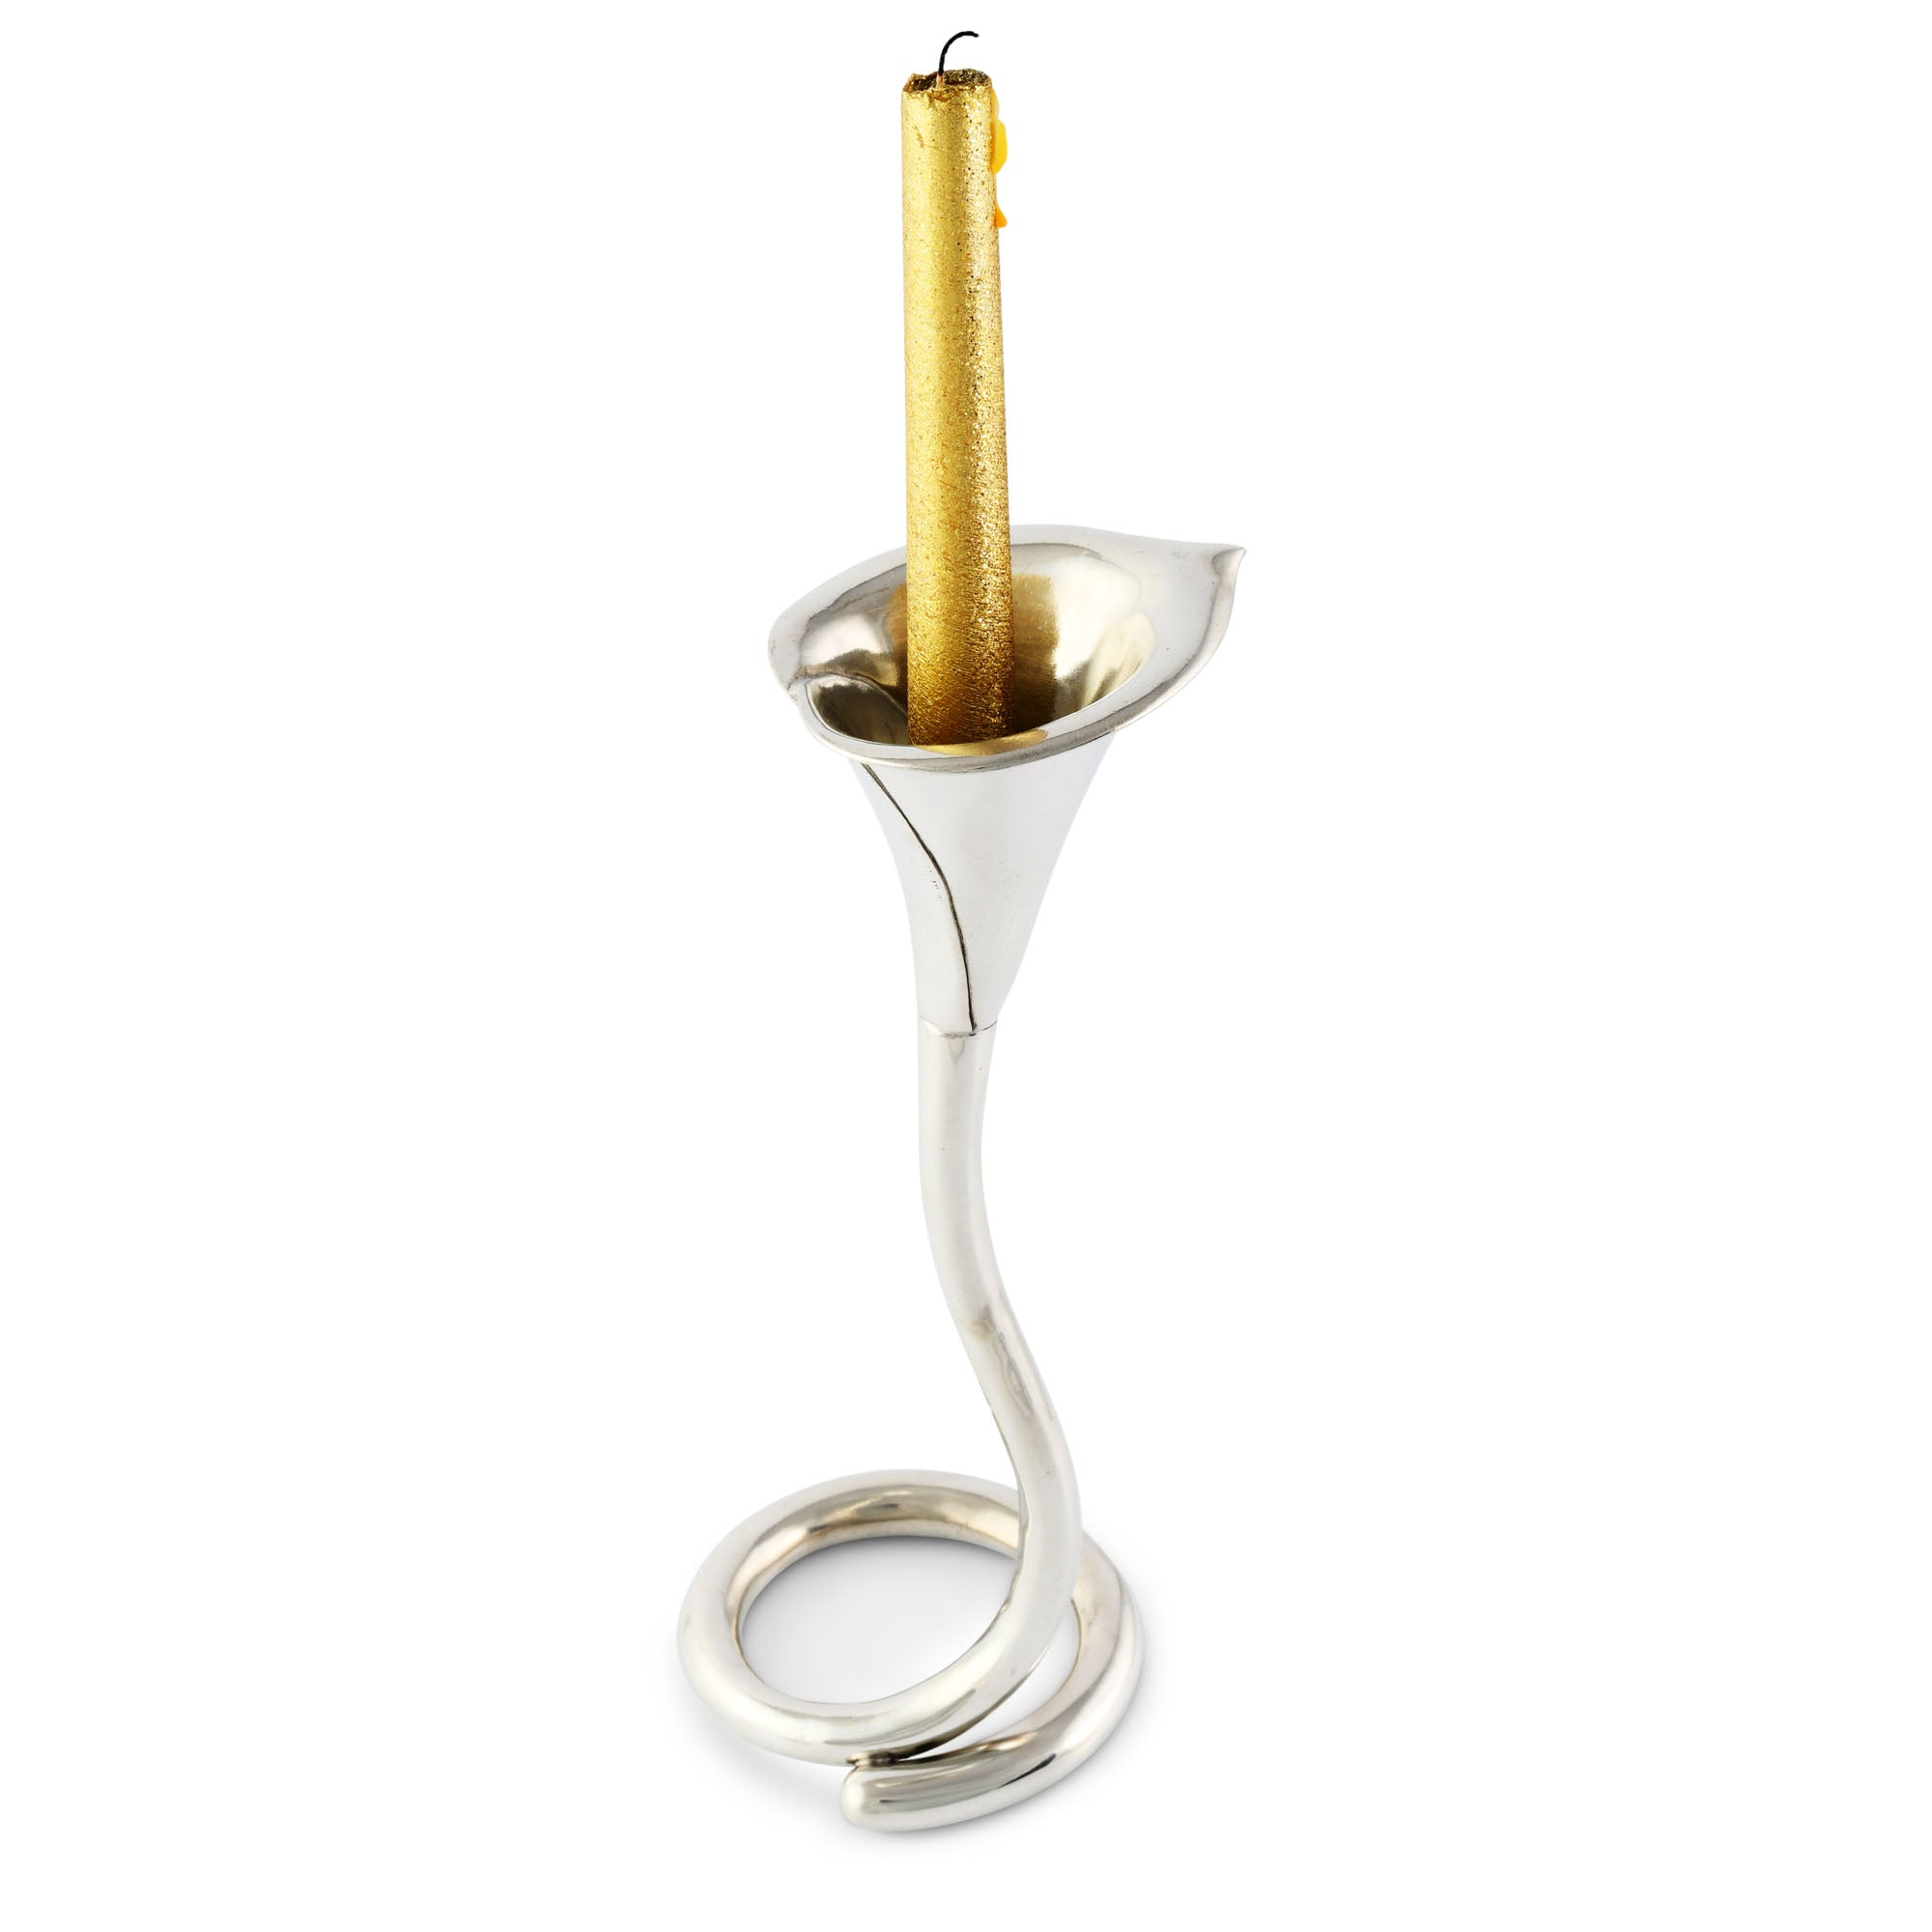 Vagabond House Lily Candlestick Tall Product Image